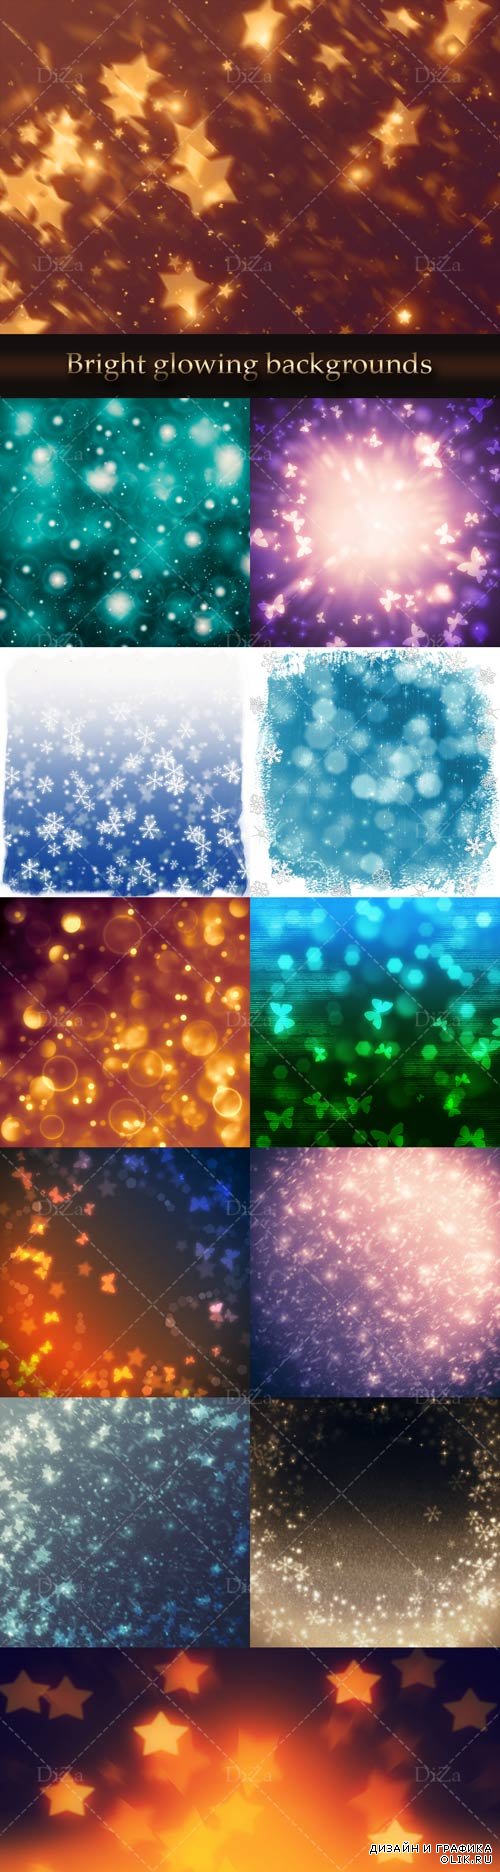 Bright glowing backgrounds 